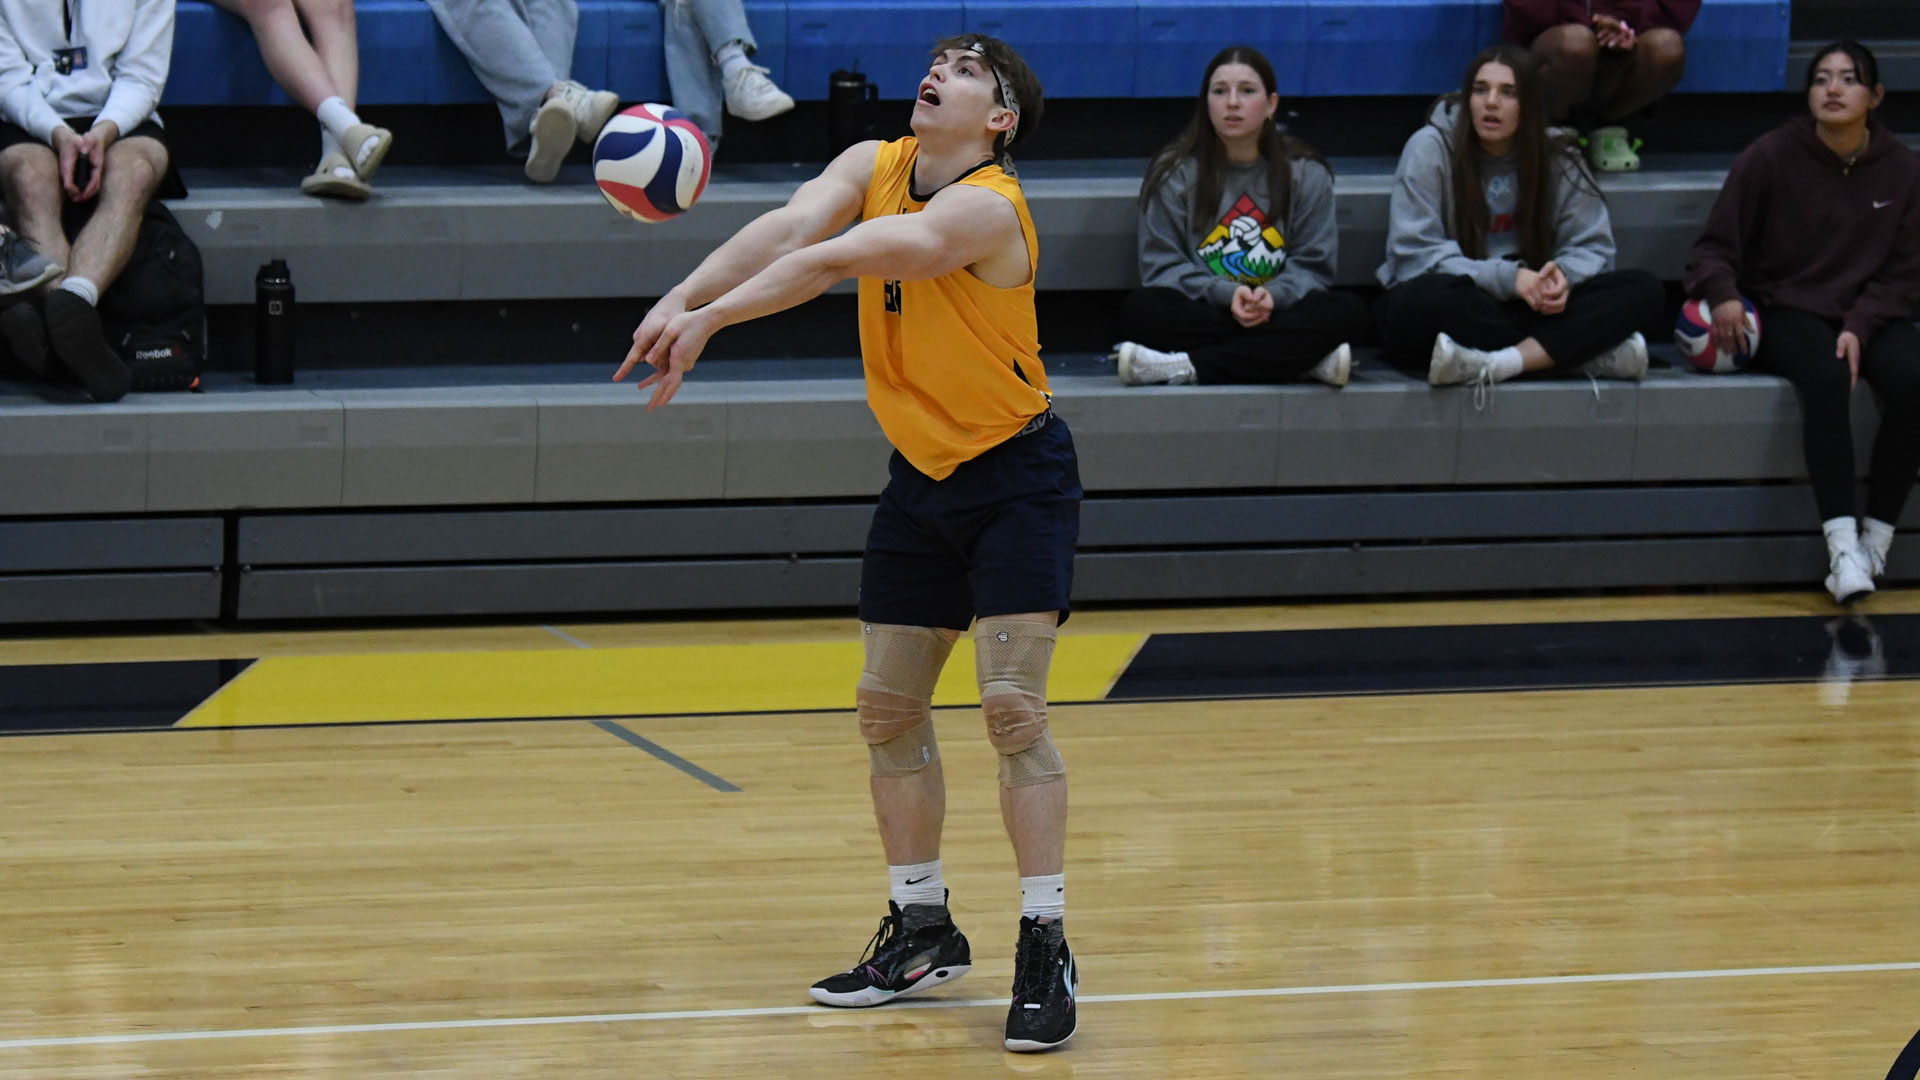 Pride third set rally not enough in 3-1 loss to UHSP